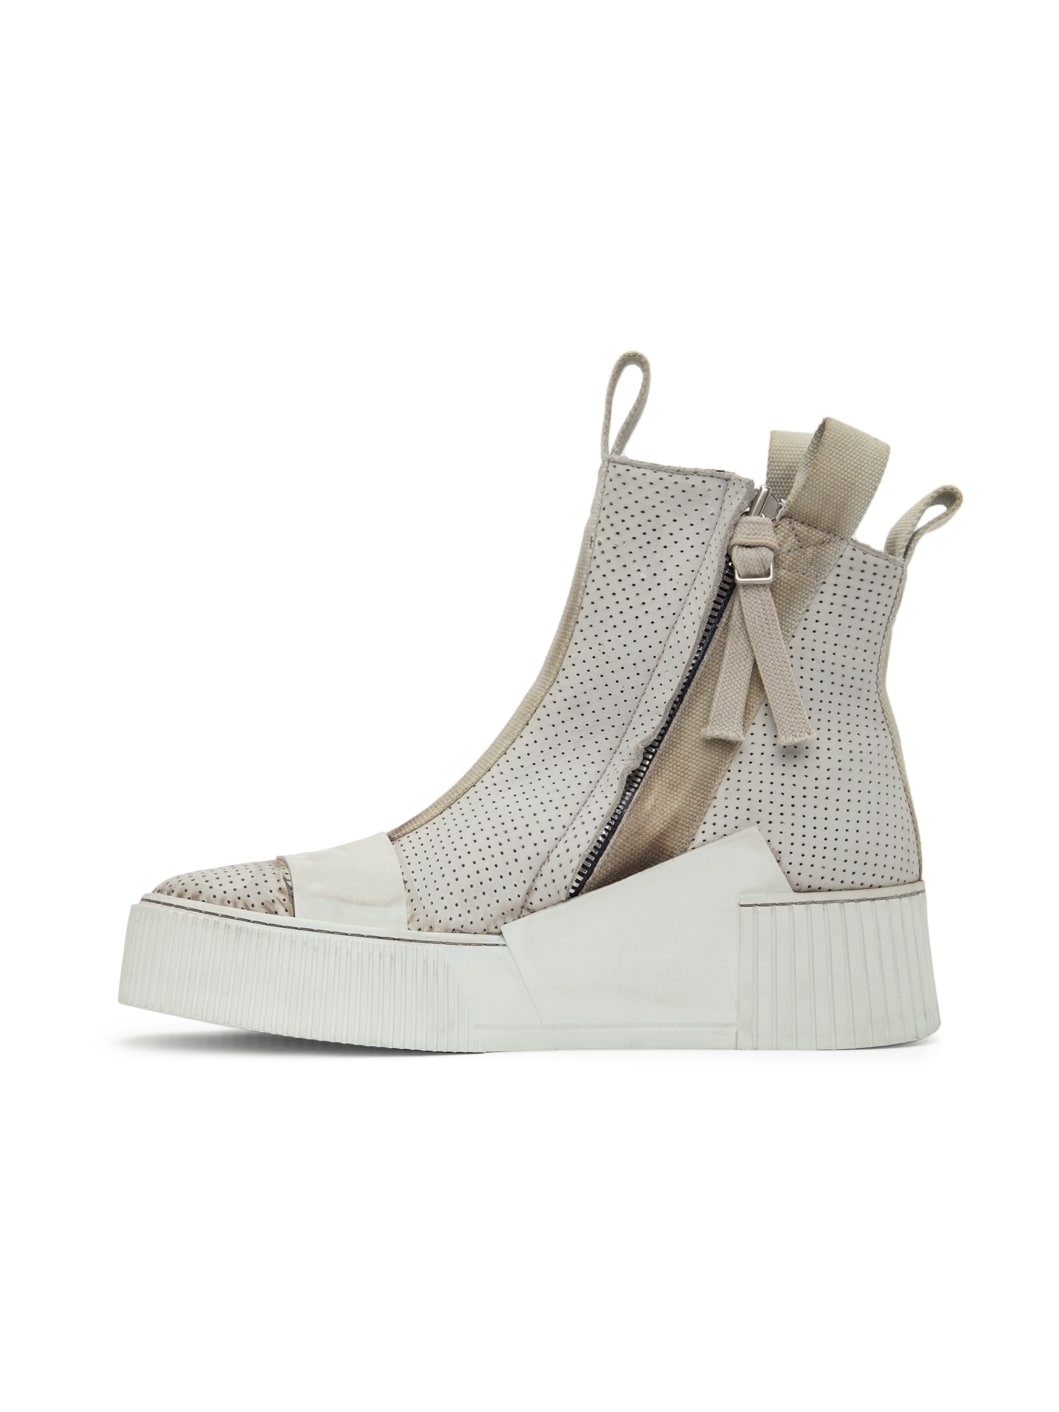 Off-White Bamba 3.1 High Top Sneakers - 3